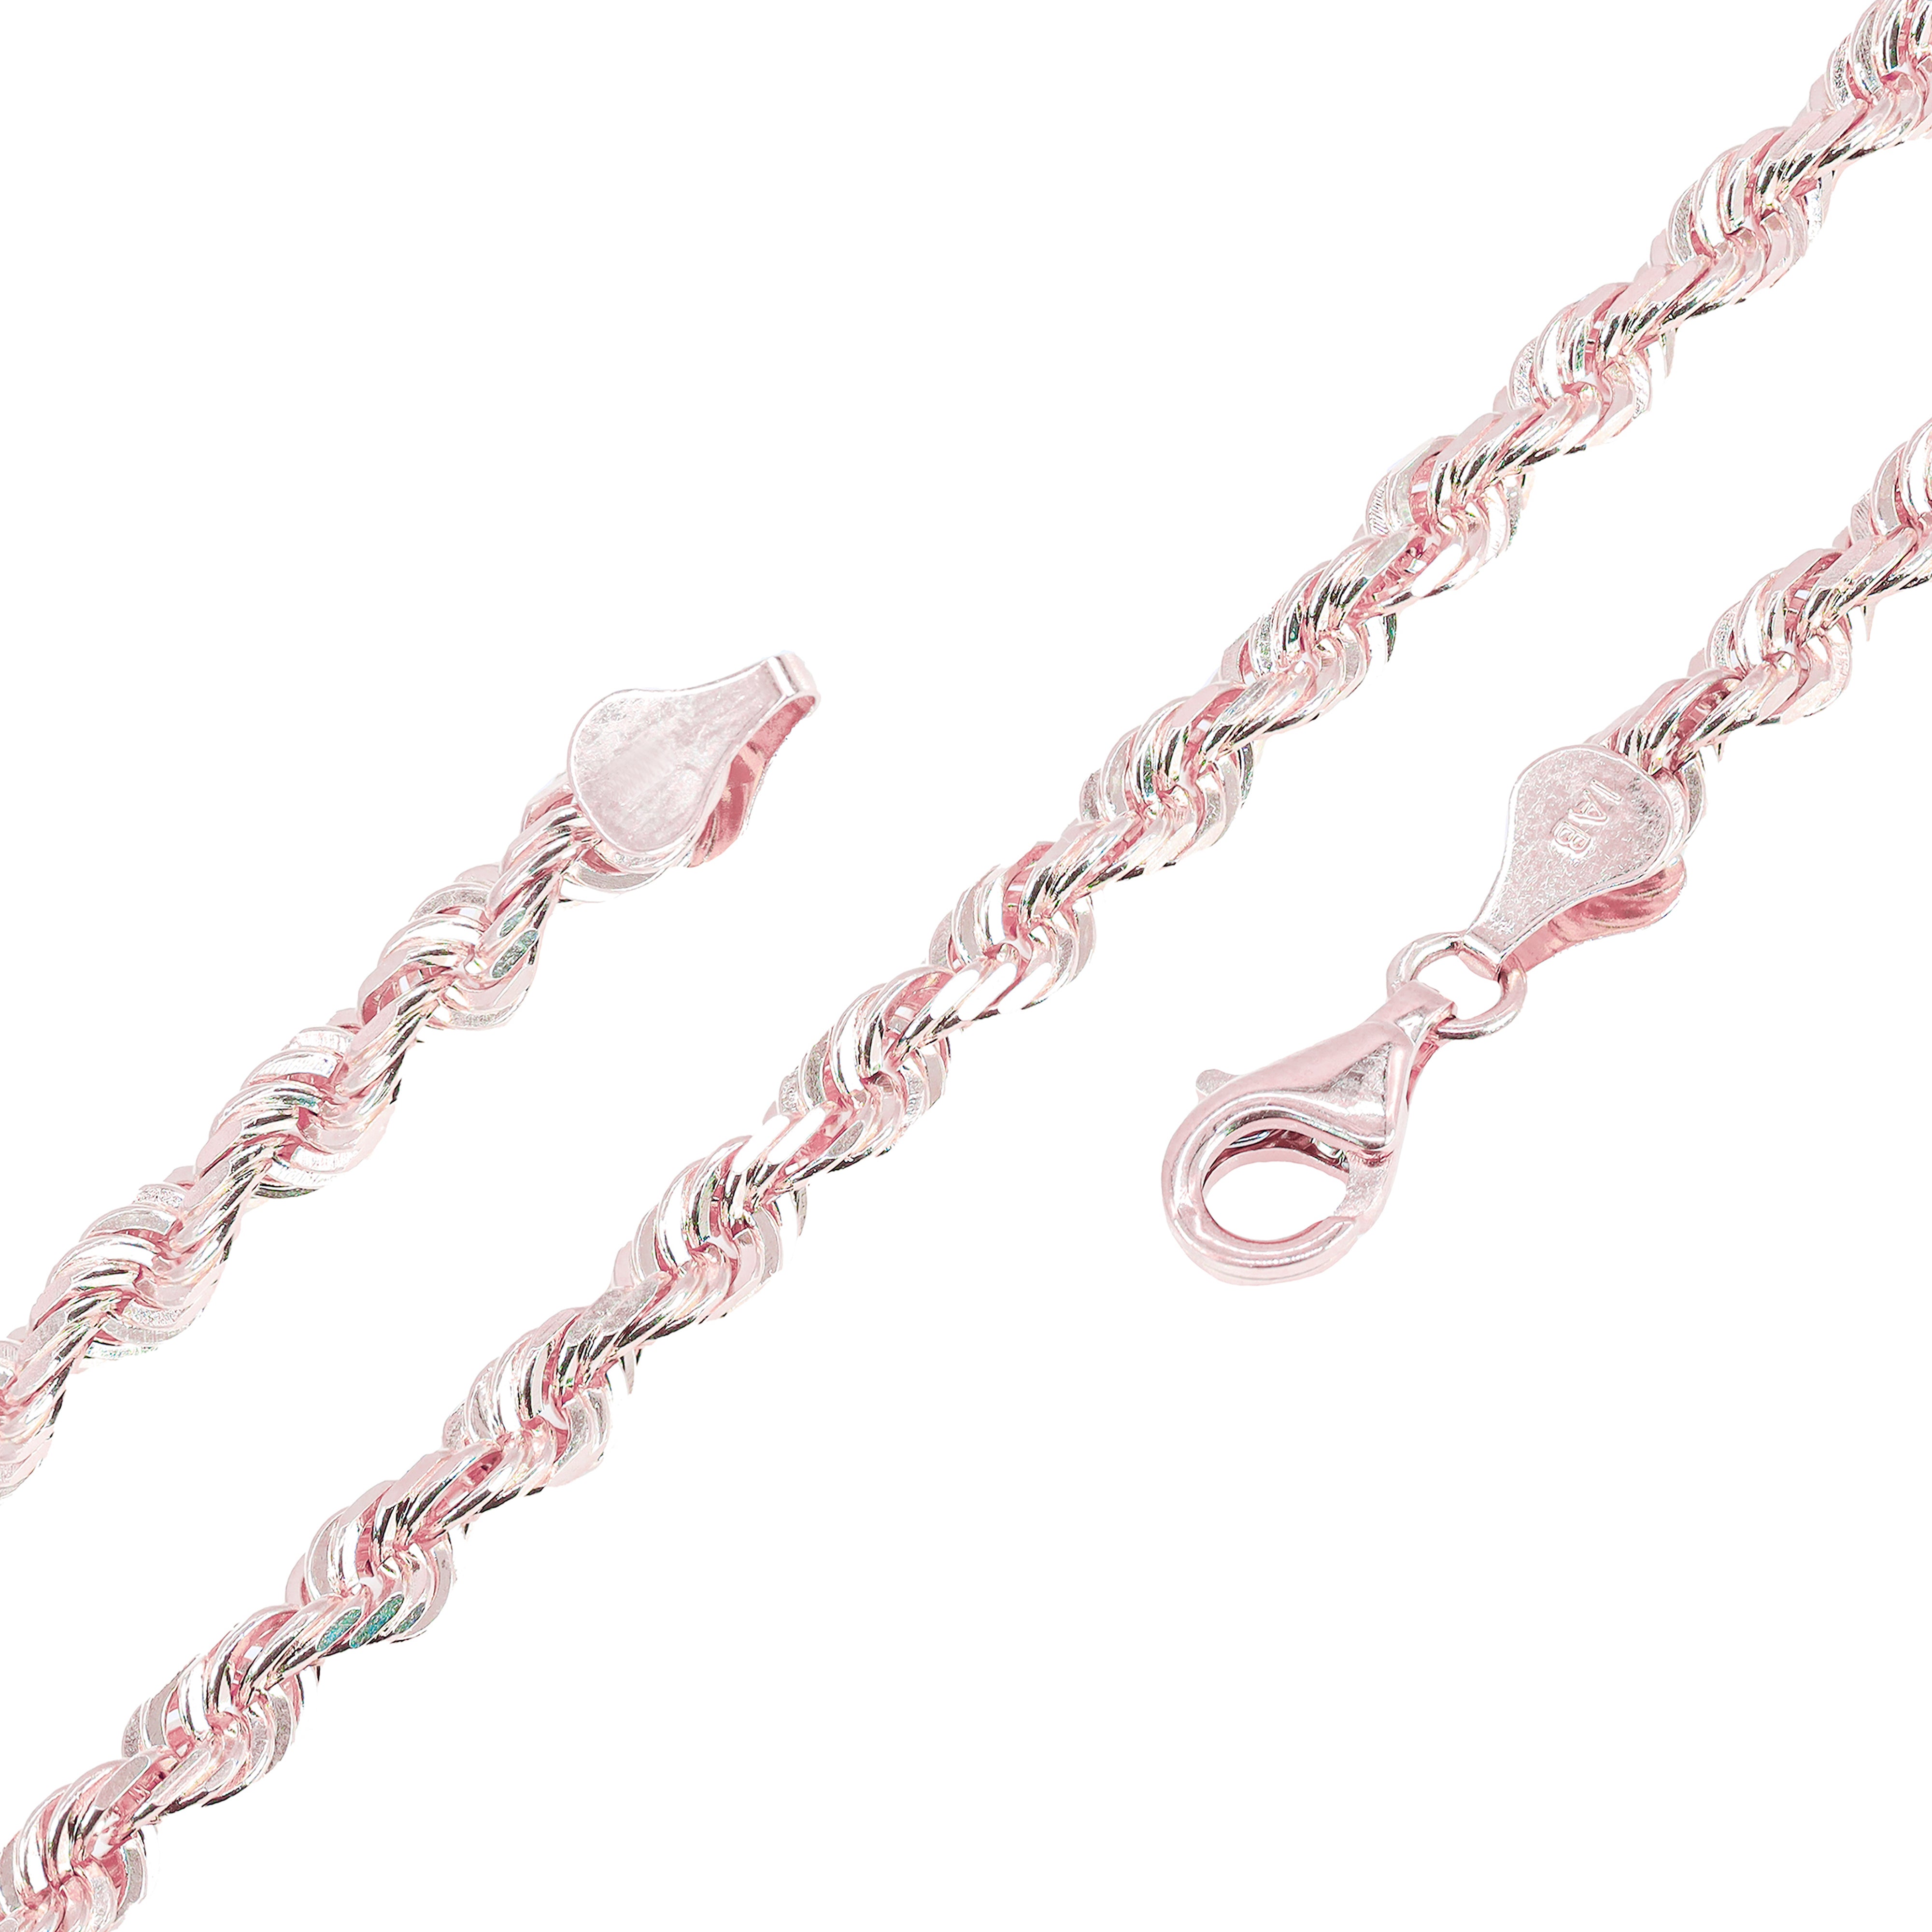 10KT Solid Rose Gold Rope Chain